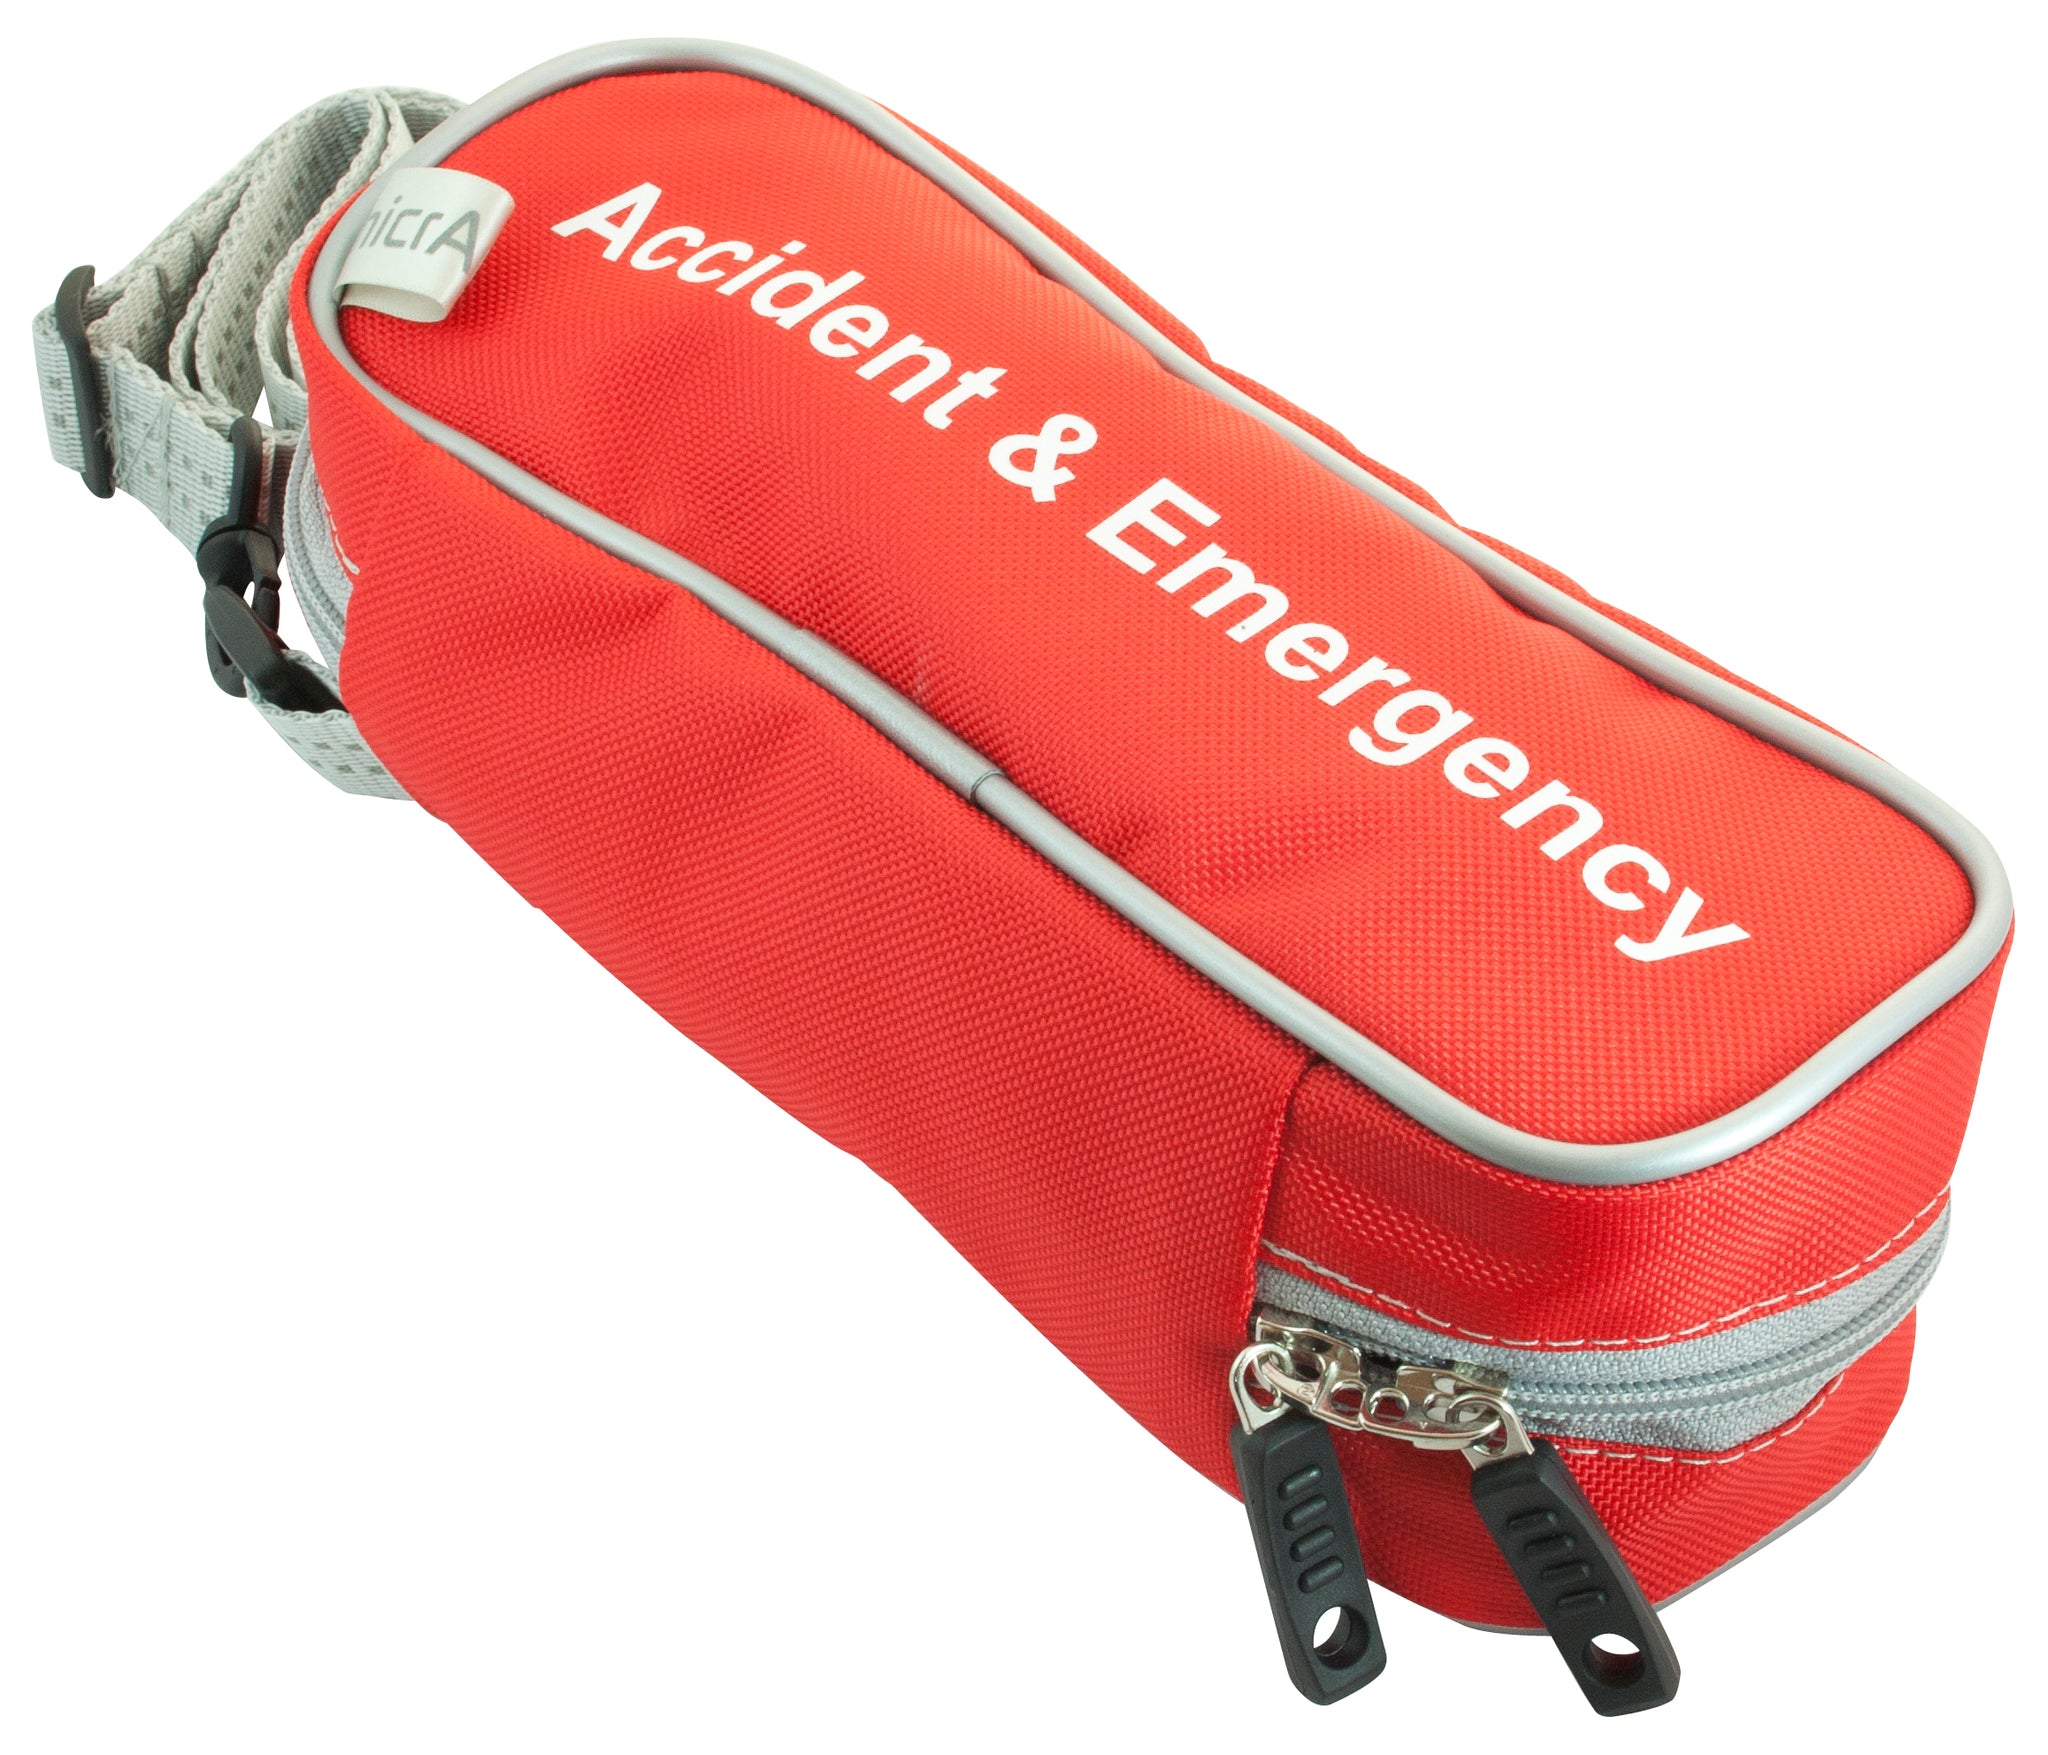 Carrying Case (A and E logo)